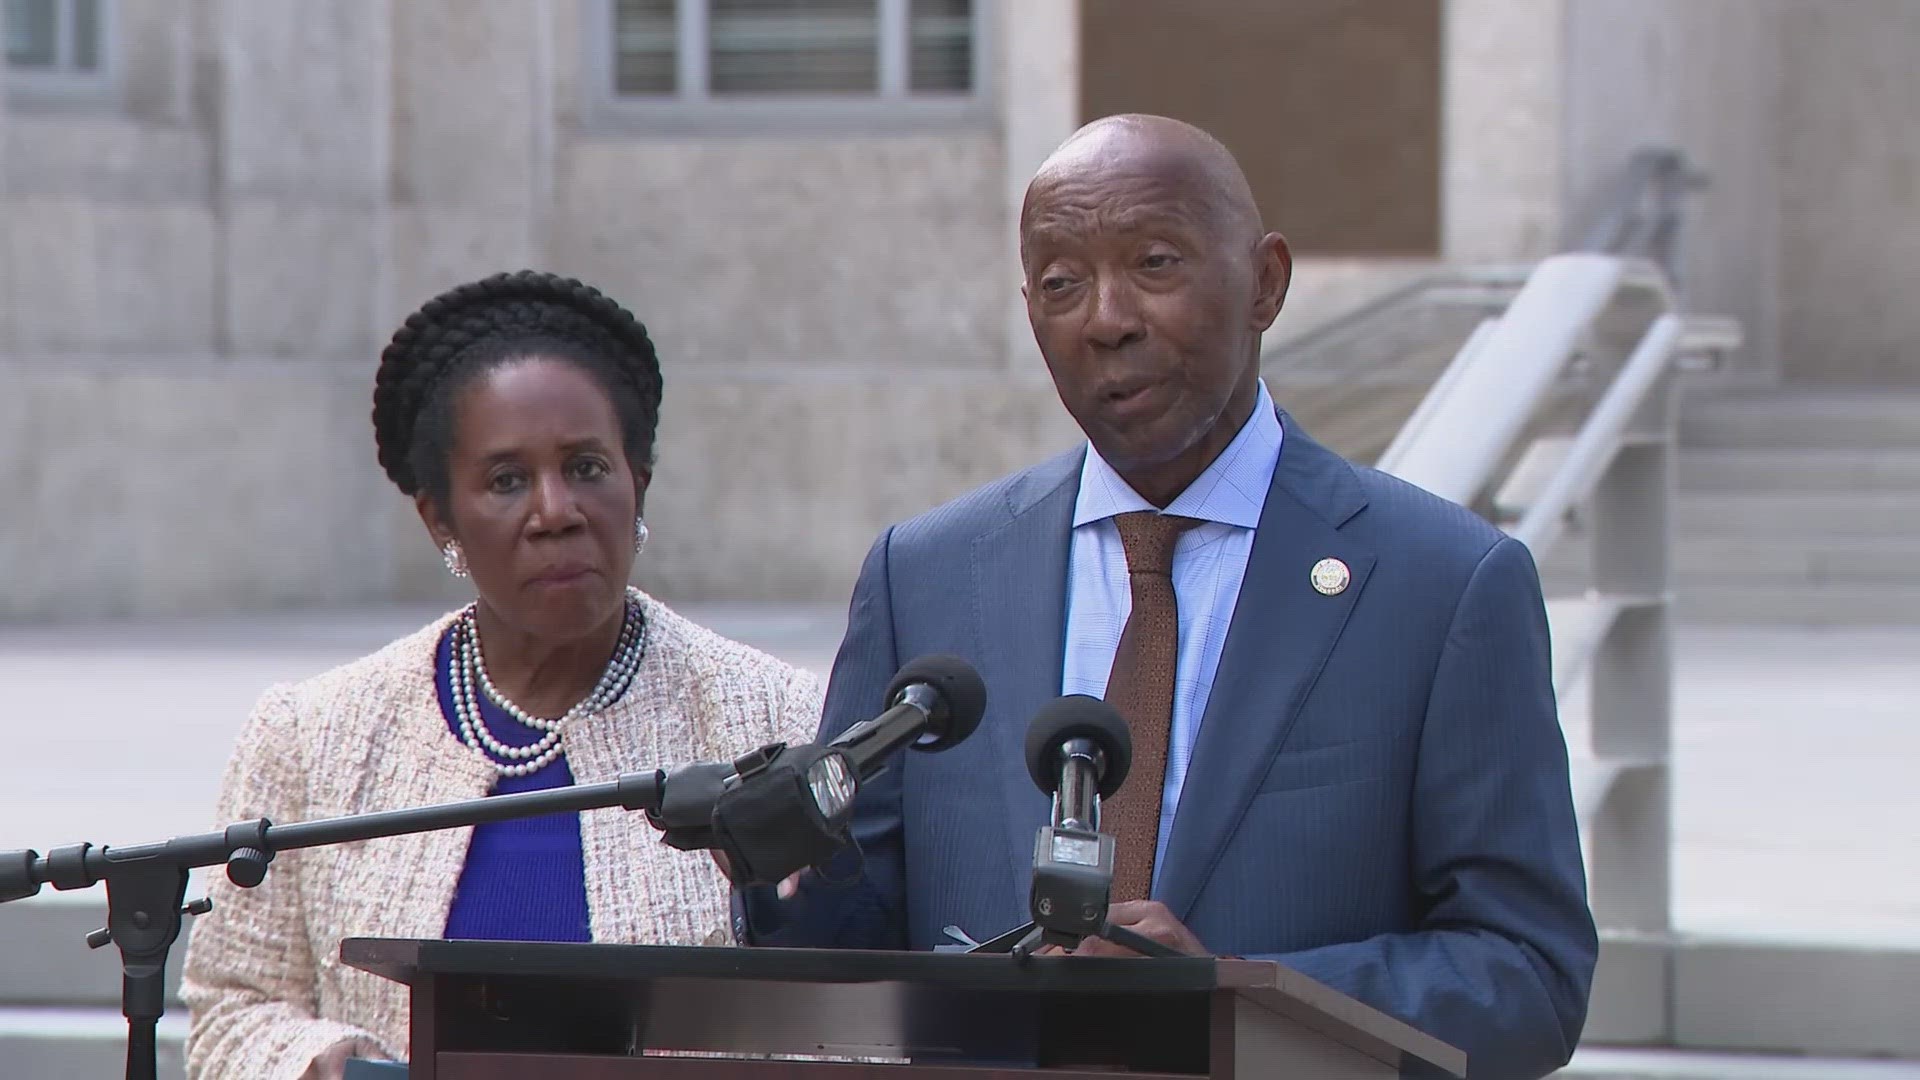 Turner made the announcement the day after voters sent Sheila Jackson Lee and John Whitmire to a runoff.